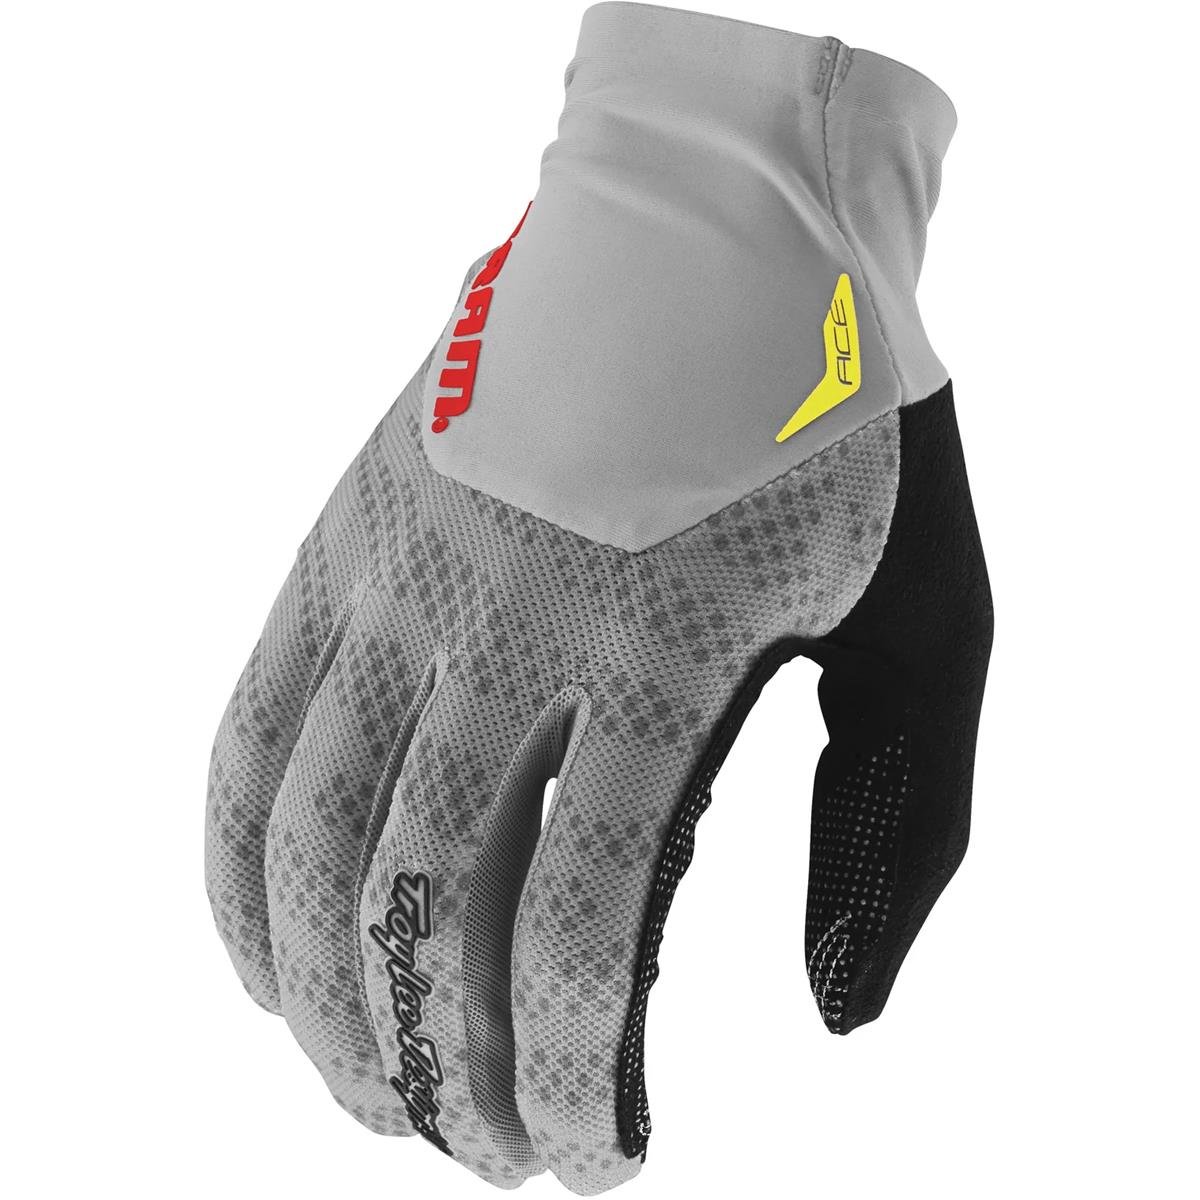 Troy Lee Designs MTB Gloves Ace Sram - Shifted Cement